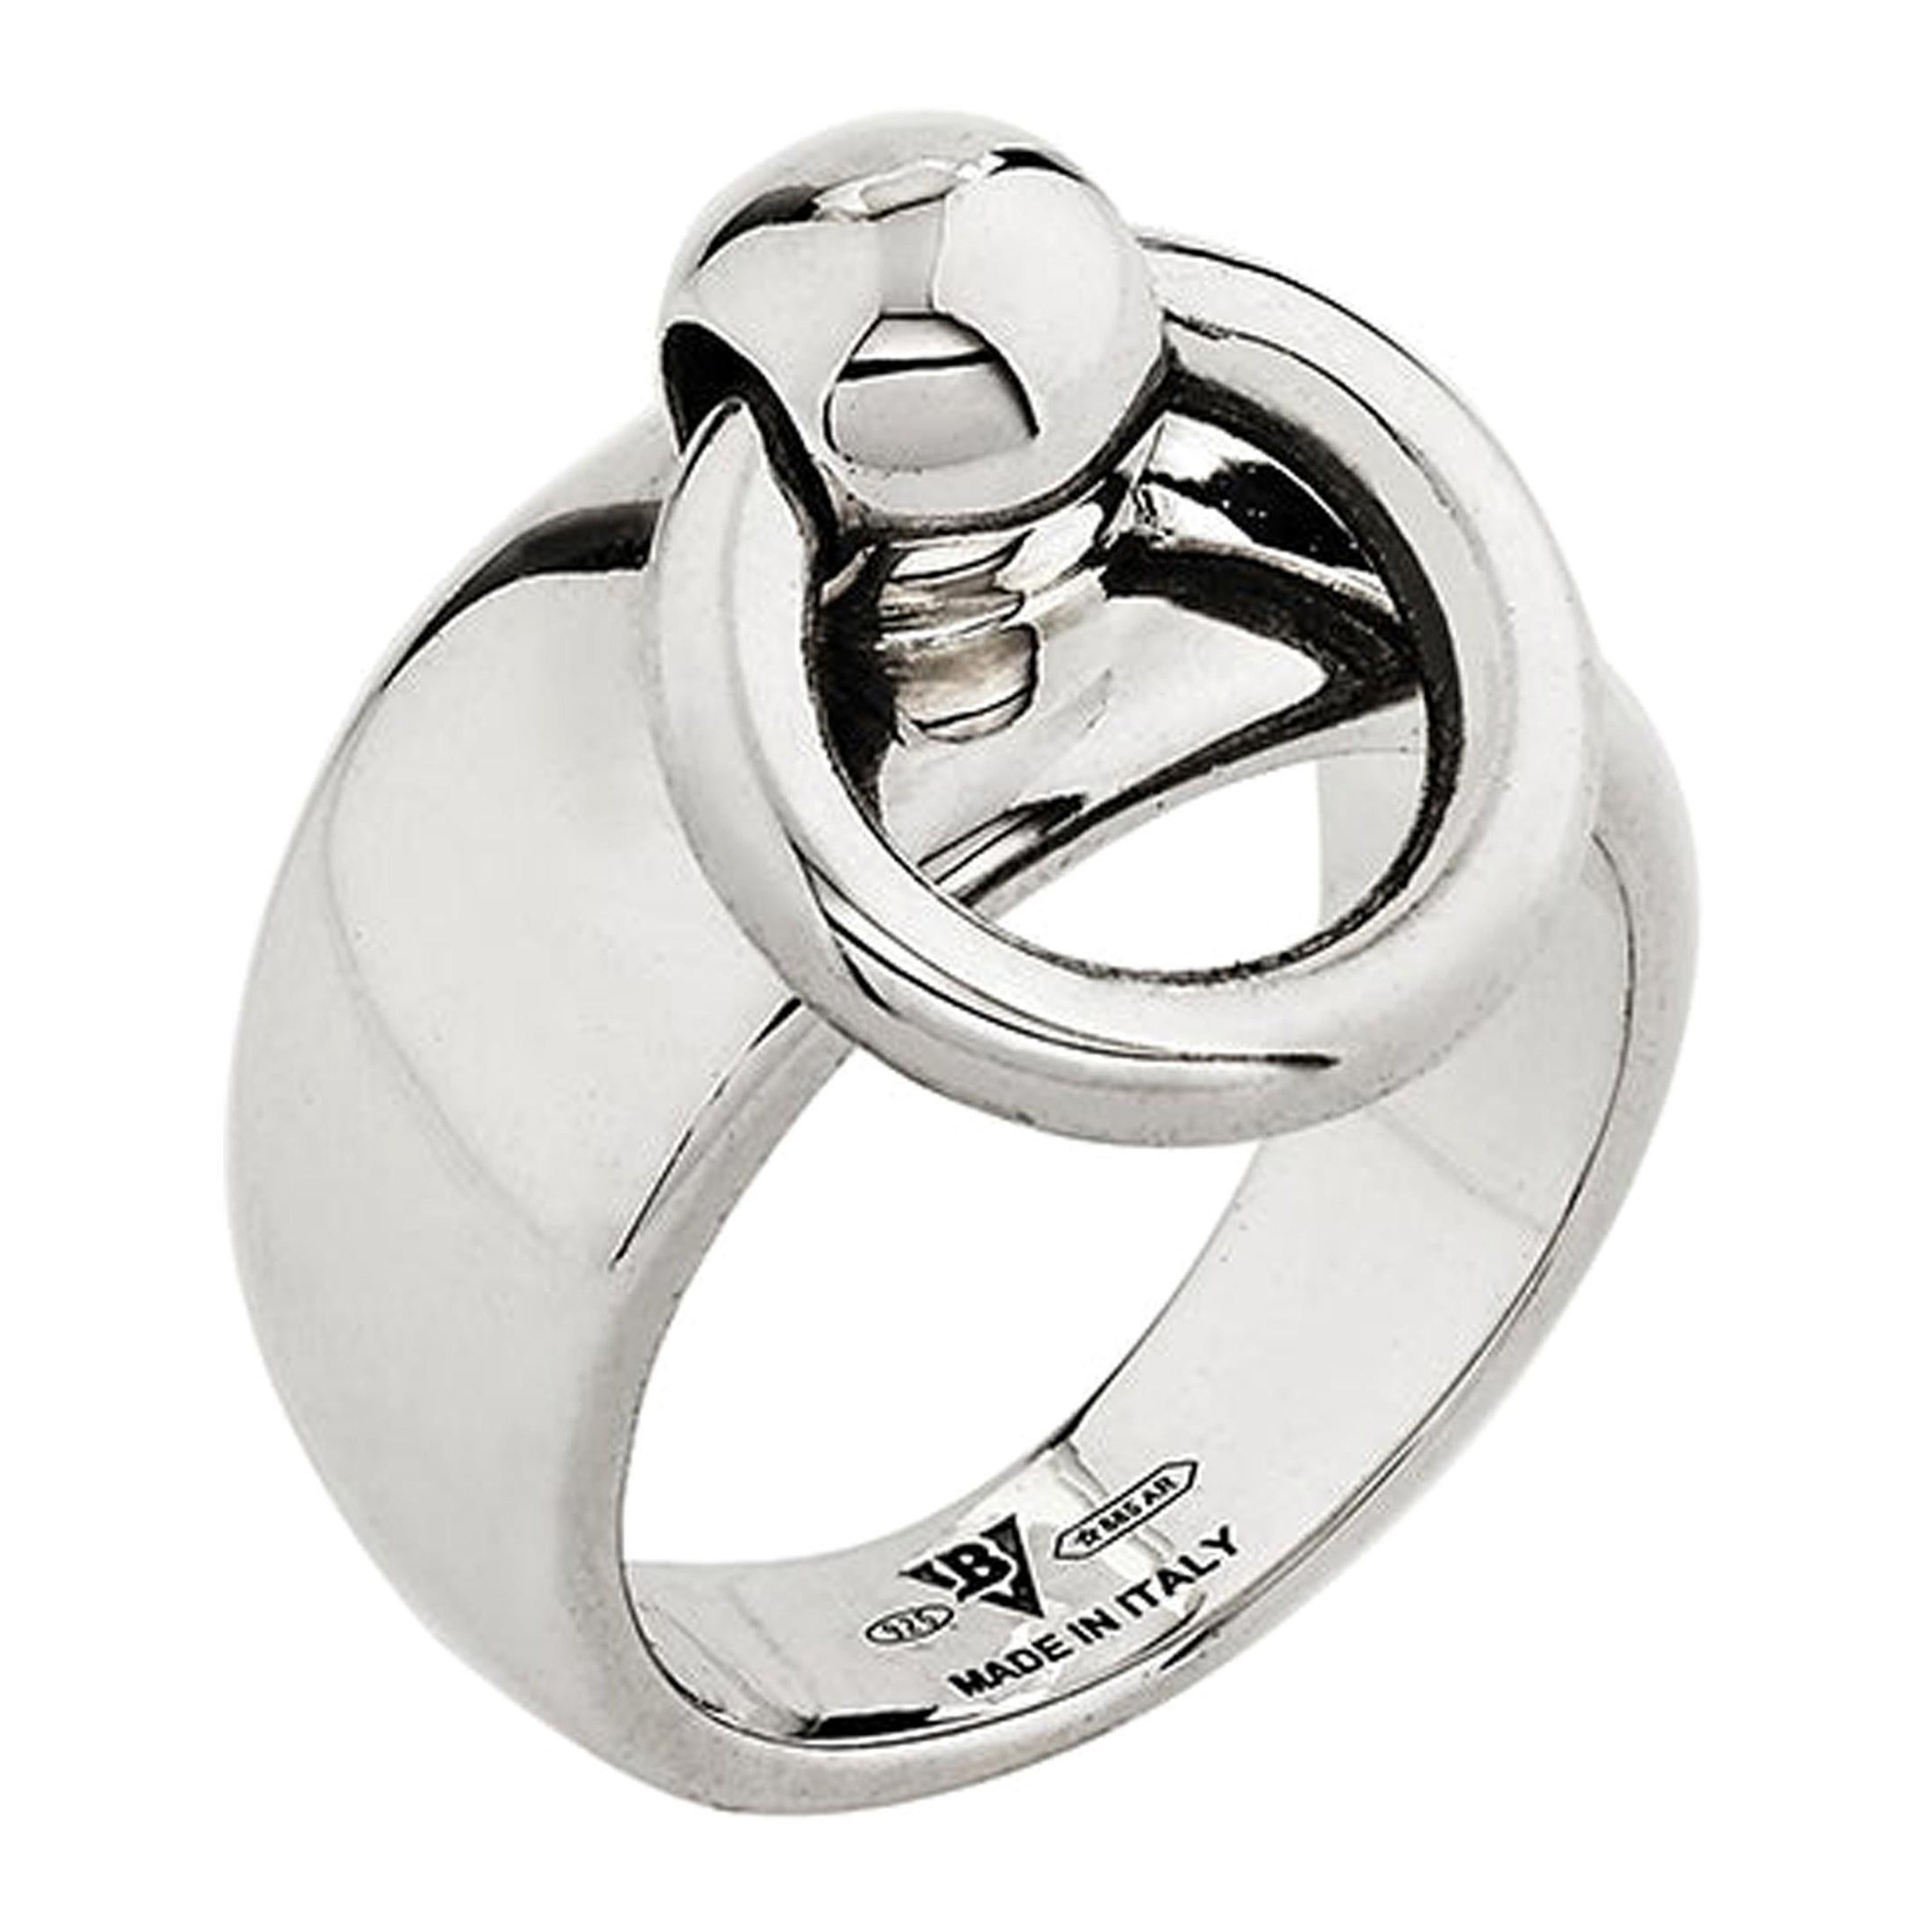 Betony Vernon "O-Ring Band Medium Ring" Ring Sterling Silver 925 in Stock For Sale